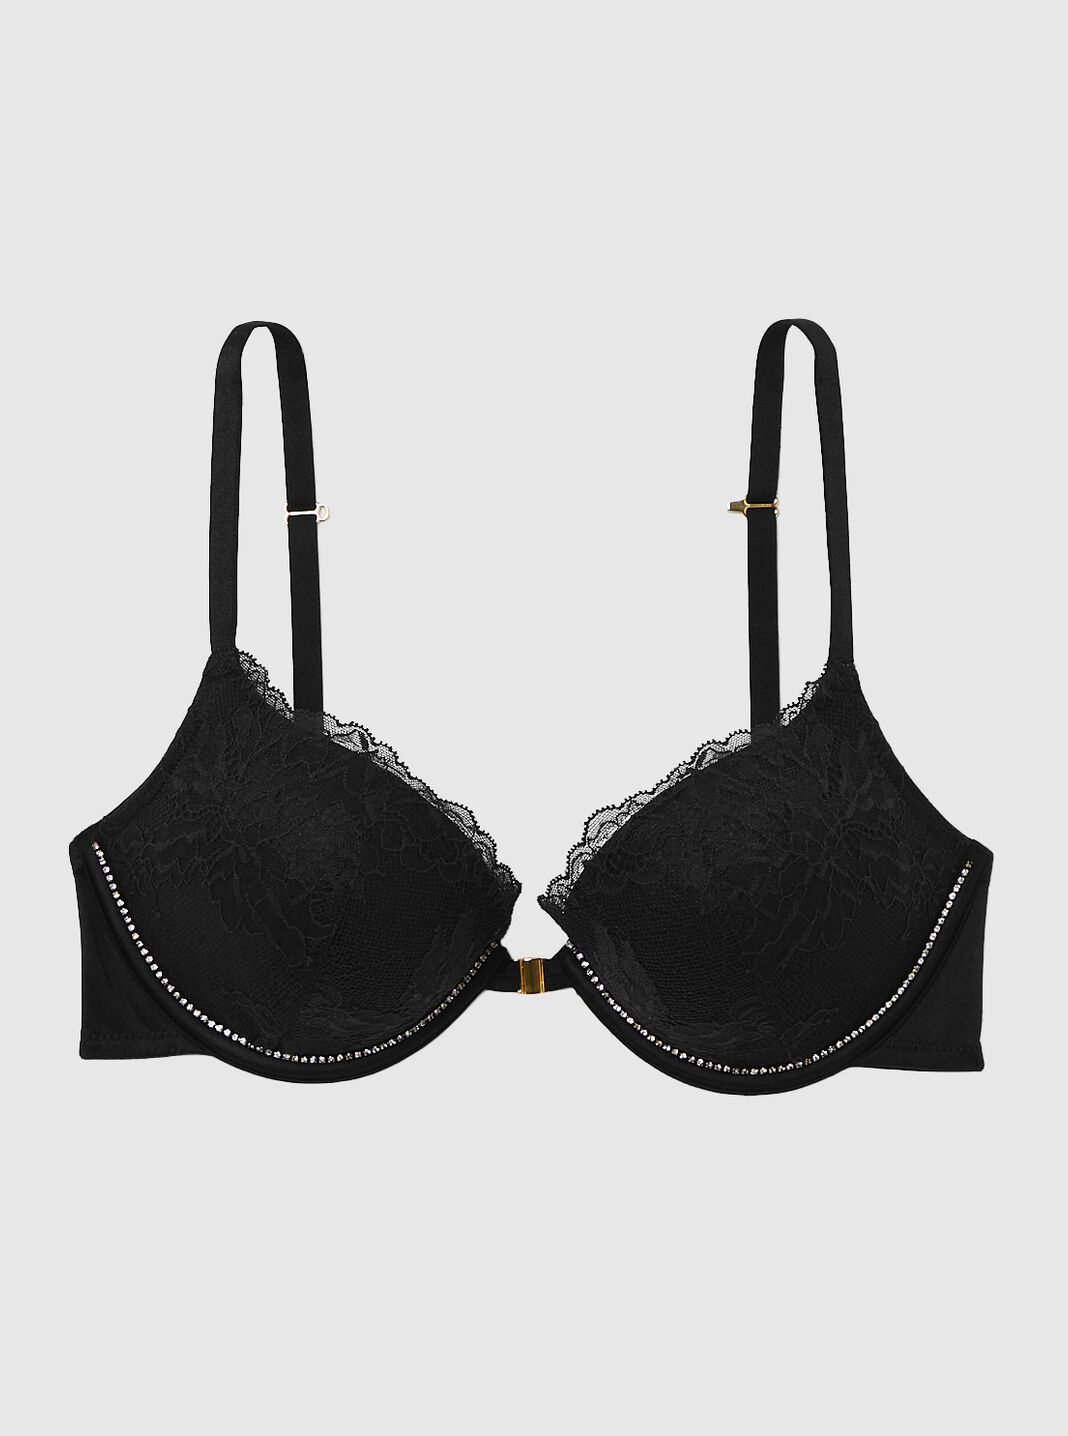 SOOMLON Plus Size Push Up Bras for Women Ultra Full Cup No